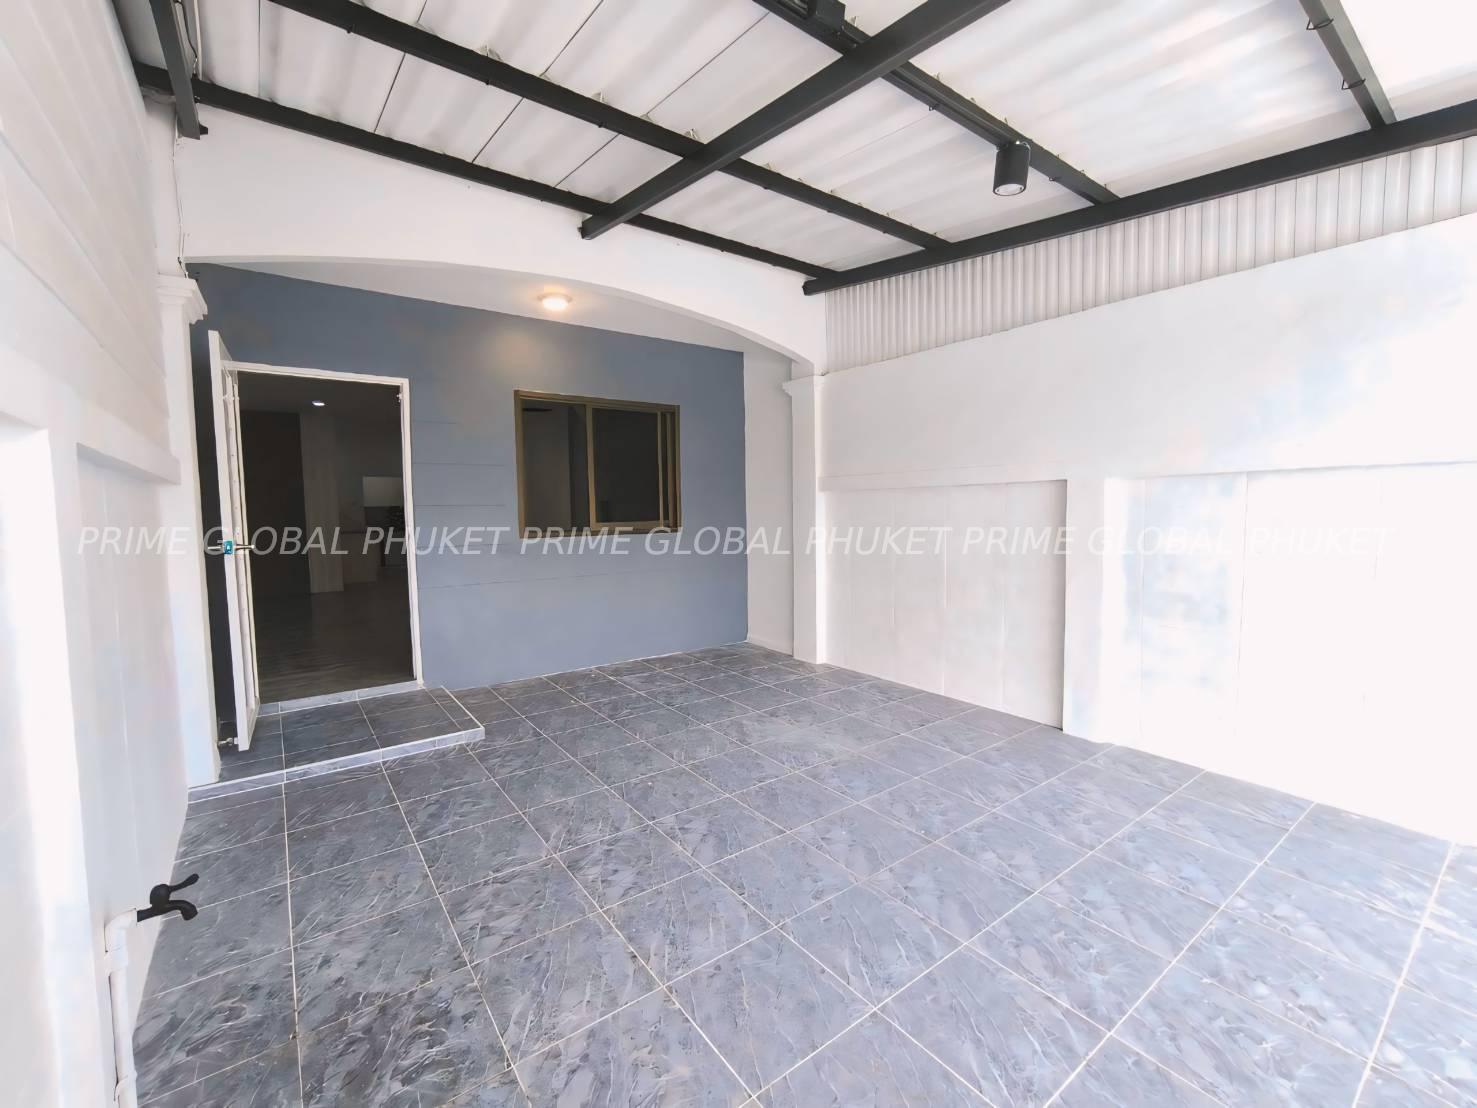 House for Sale in Phuket town